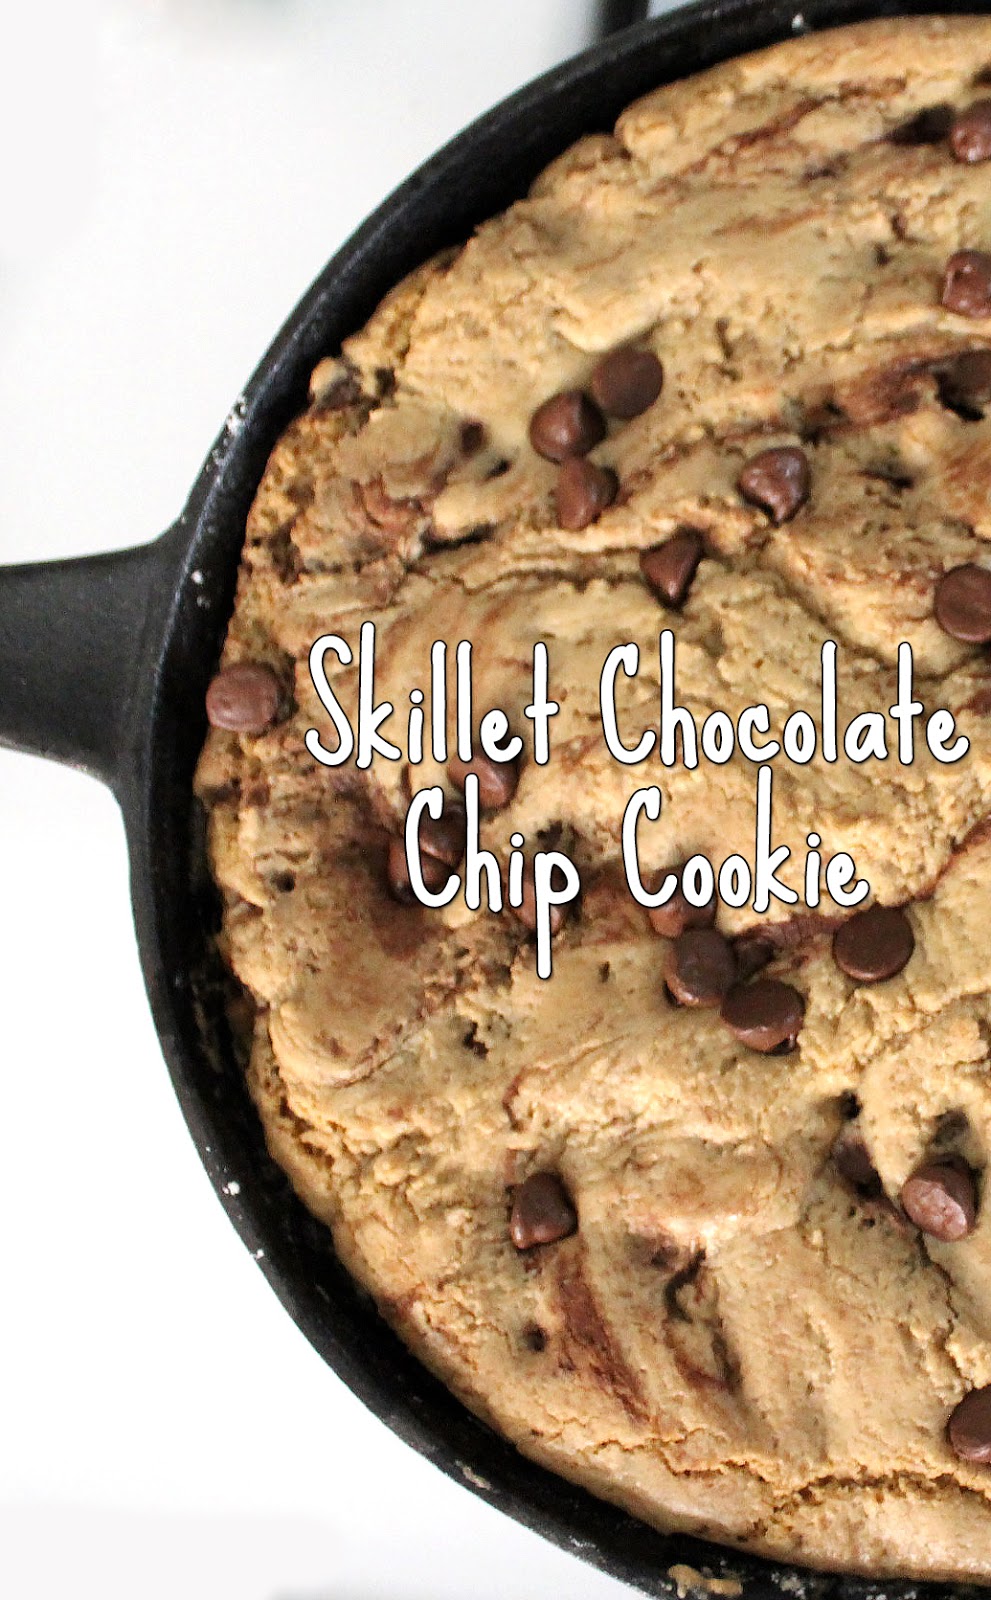 Recipe for Skillet Chocolate Chip Cookie by freshfromthe.com